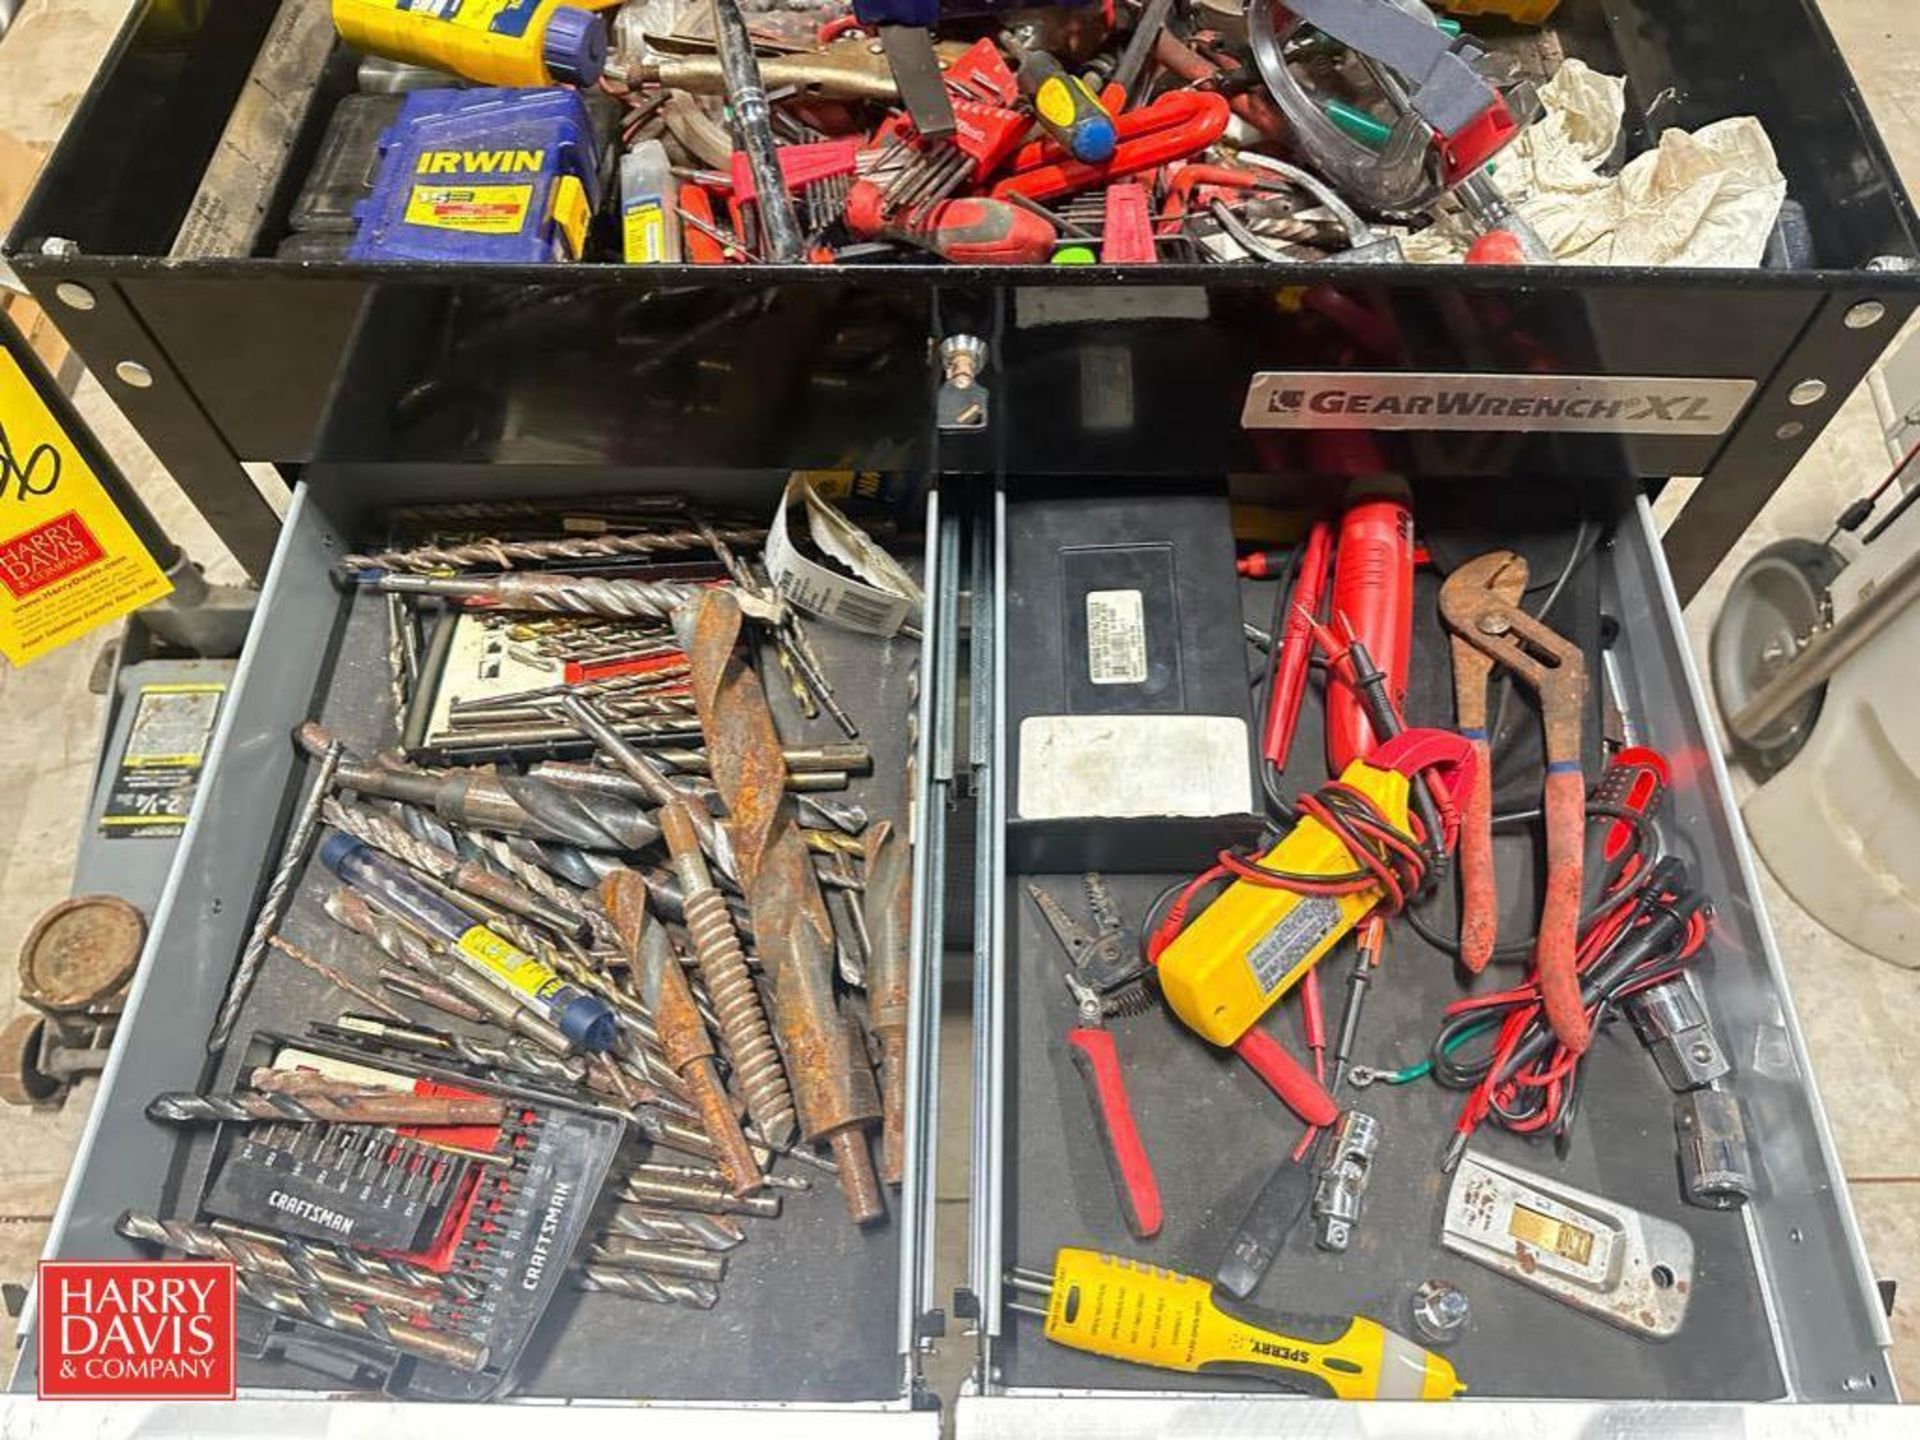 Gear Wrench XL Portable Tool Box with Allen Wrenches, Drill Bits, Electrical Testers and Wire Cutter - Image 2 of 3